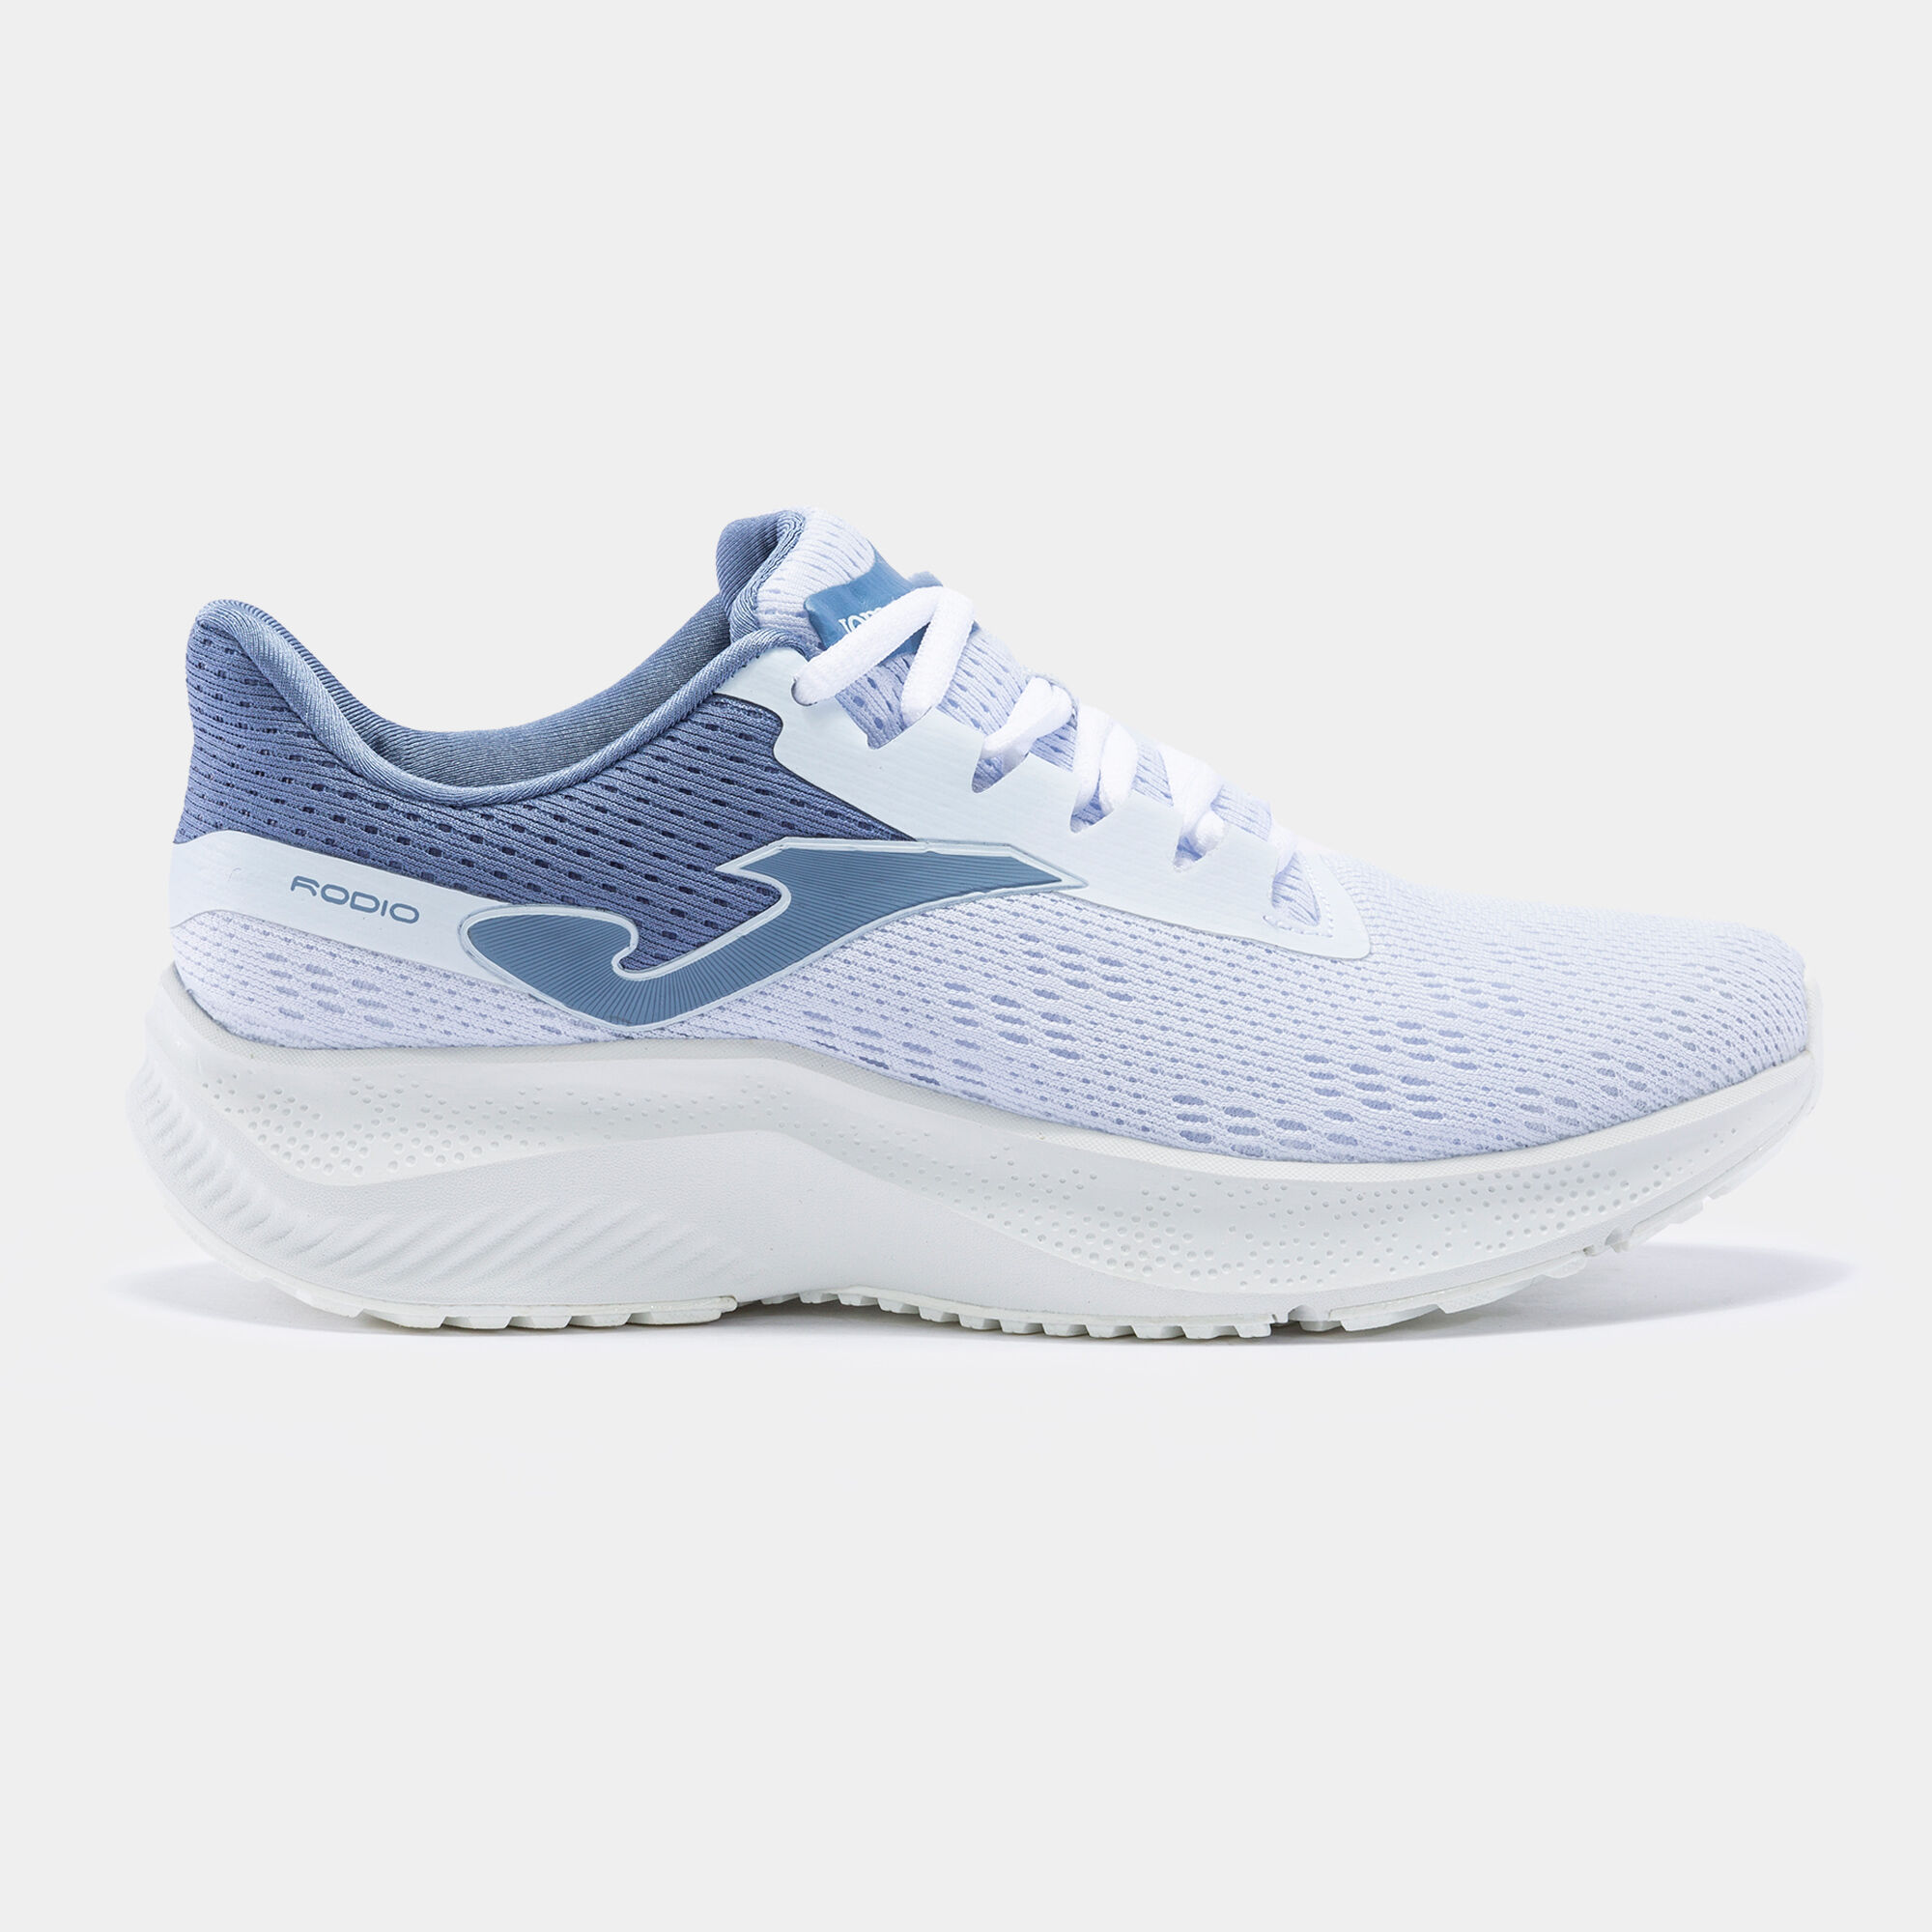 RUNNING SHOES RODIO 22 WOMAN BLUE